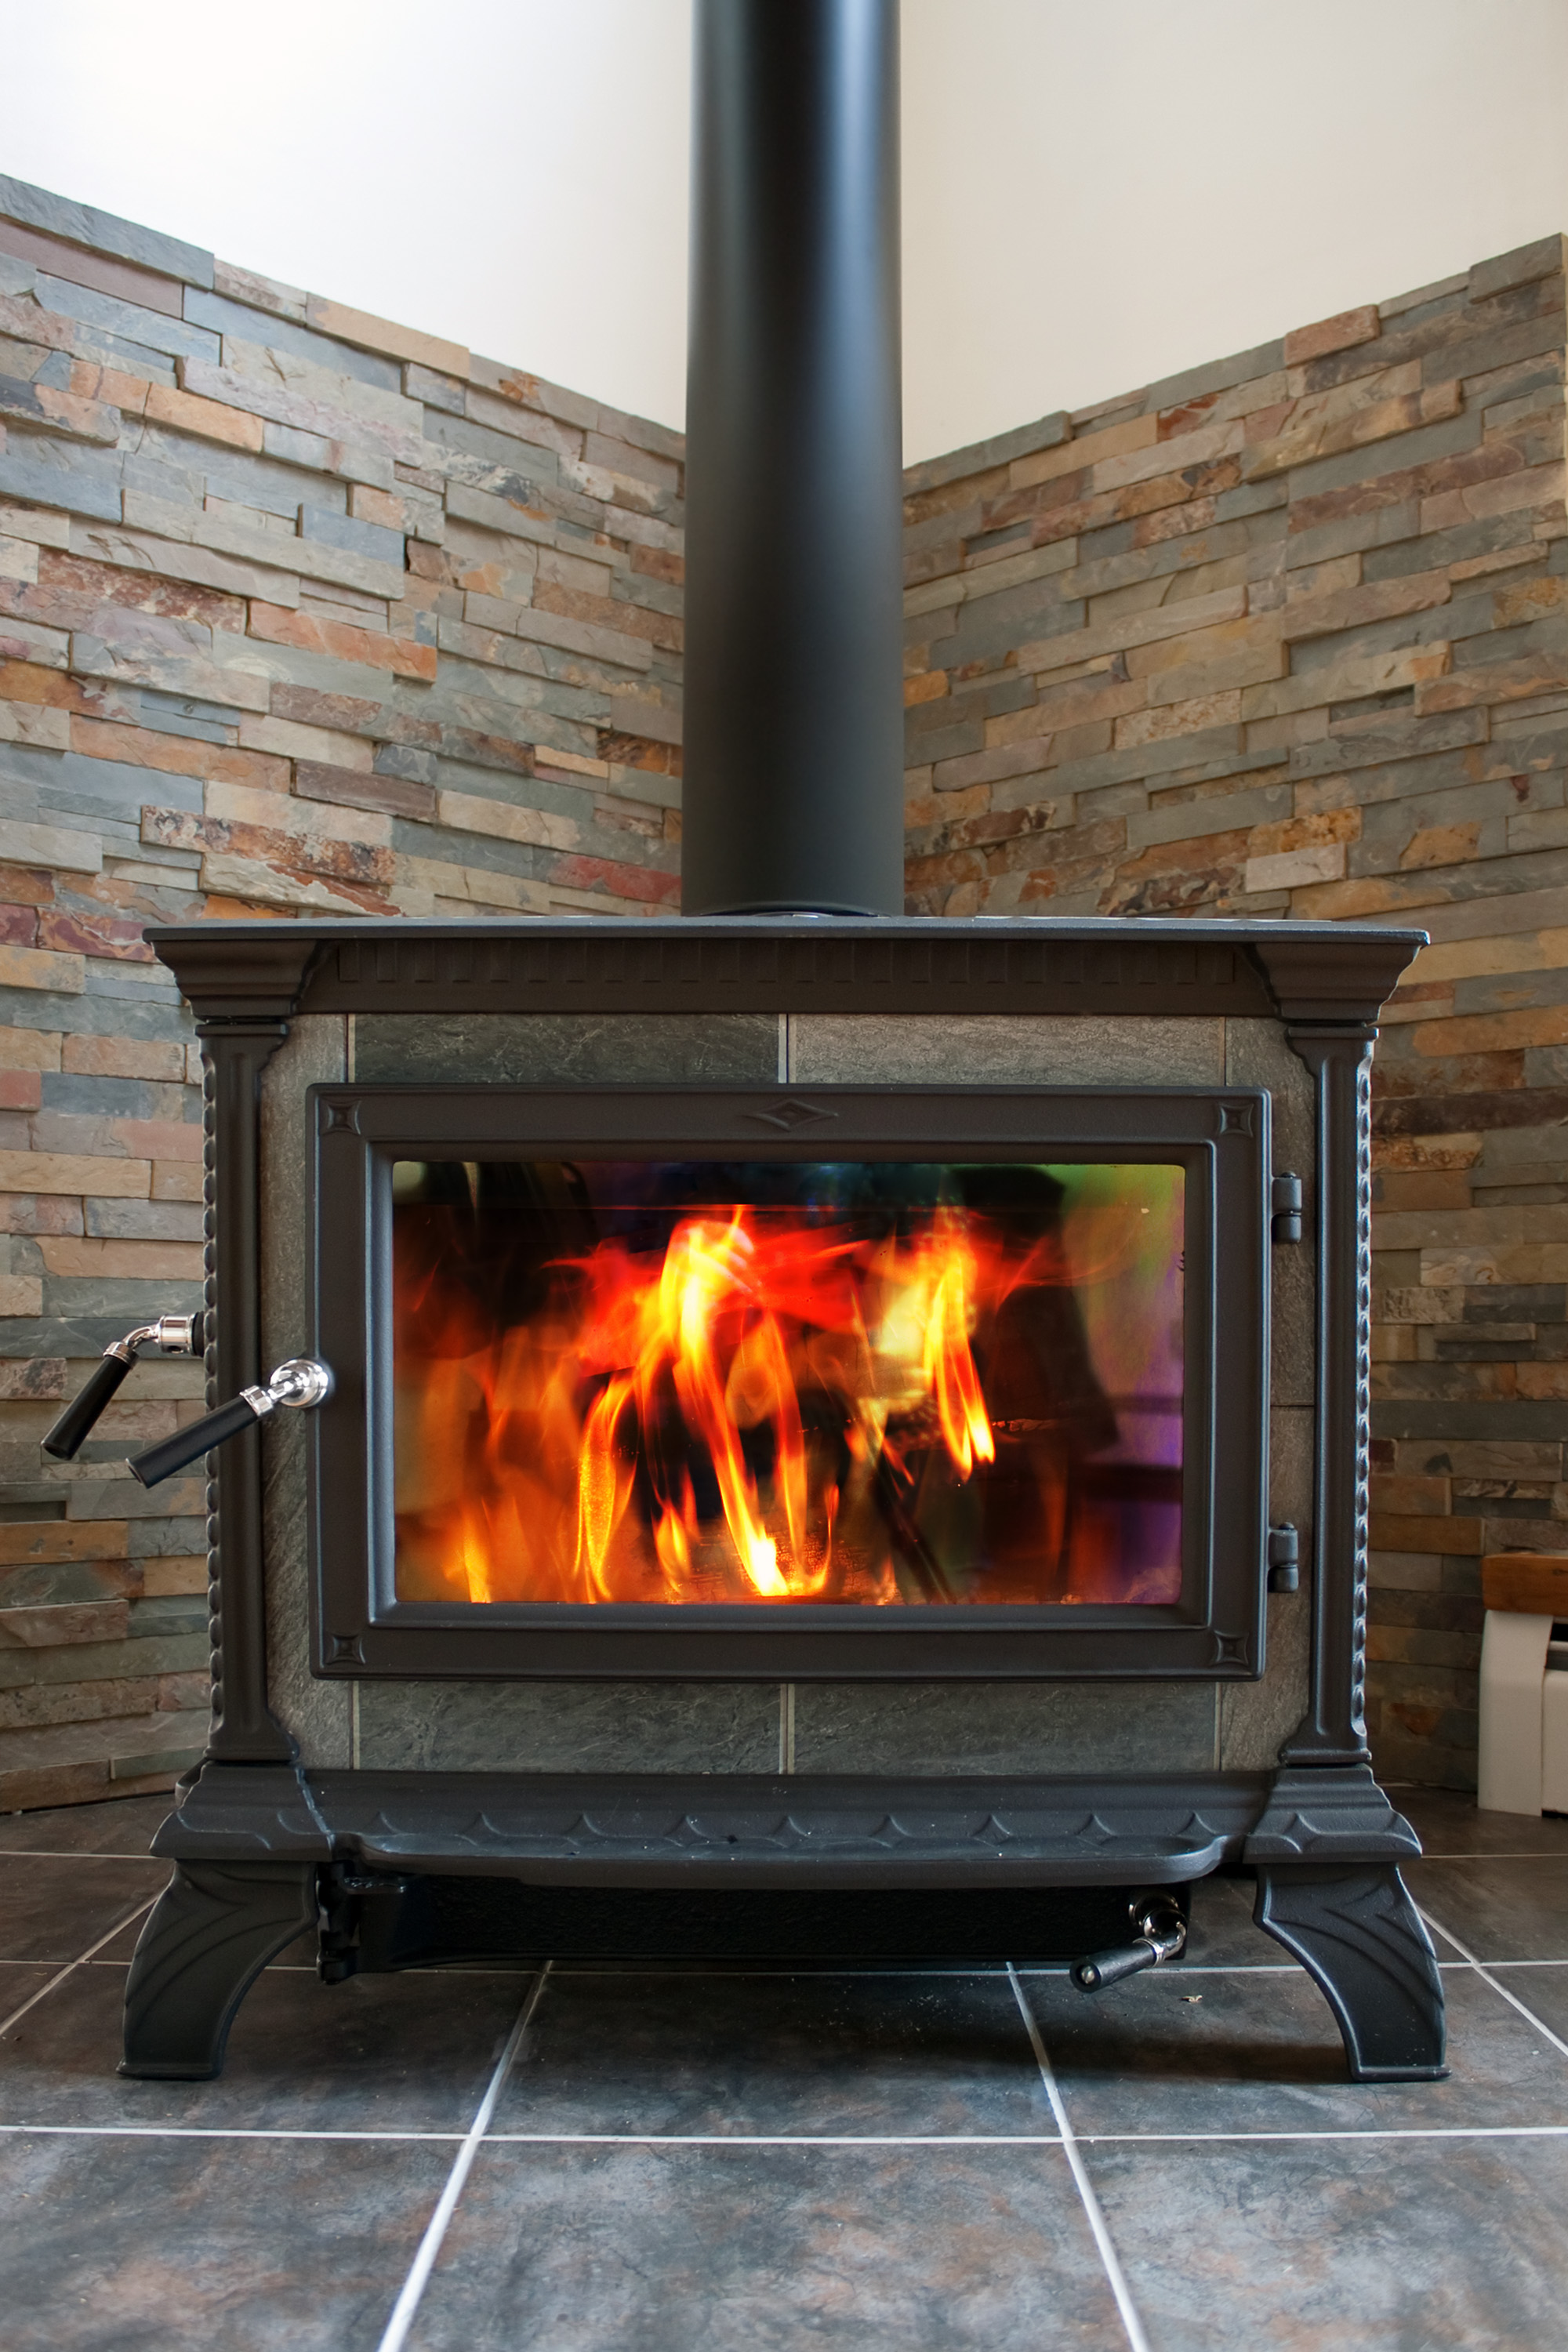 Cleaning and Maintaining Your Wood Stove - Charlotte NC - Owens Chimney Systems